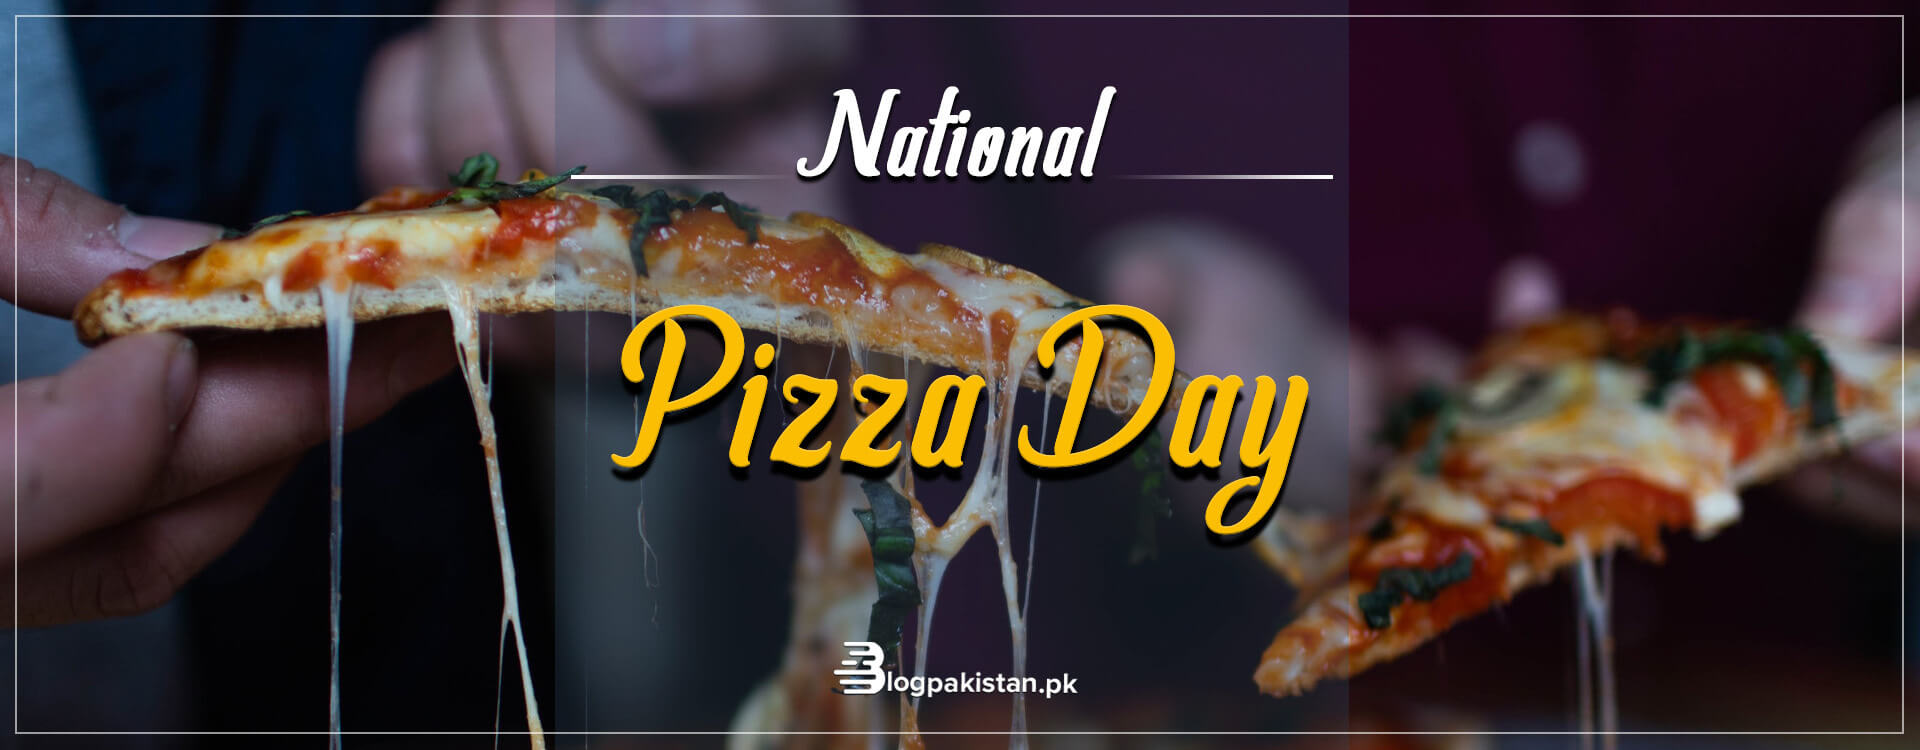 National Pizza Day: Fascinating Facts You Need to Know